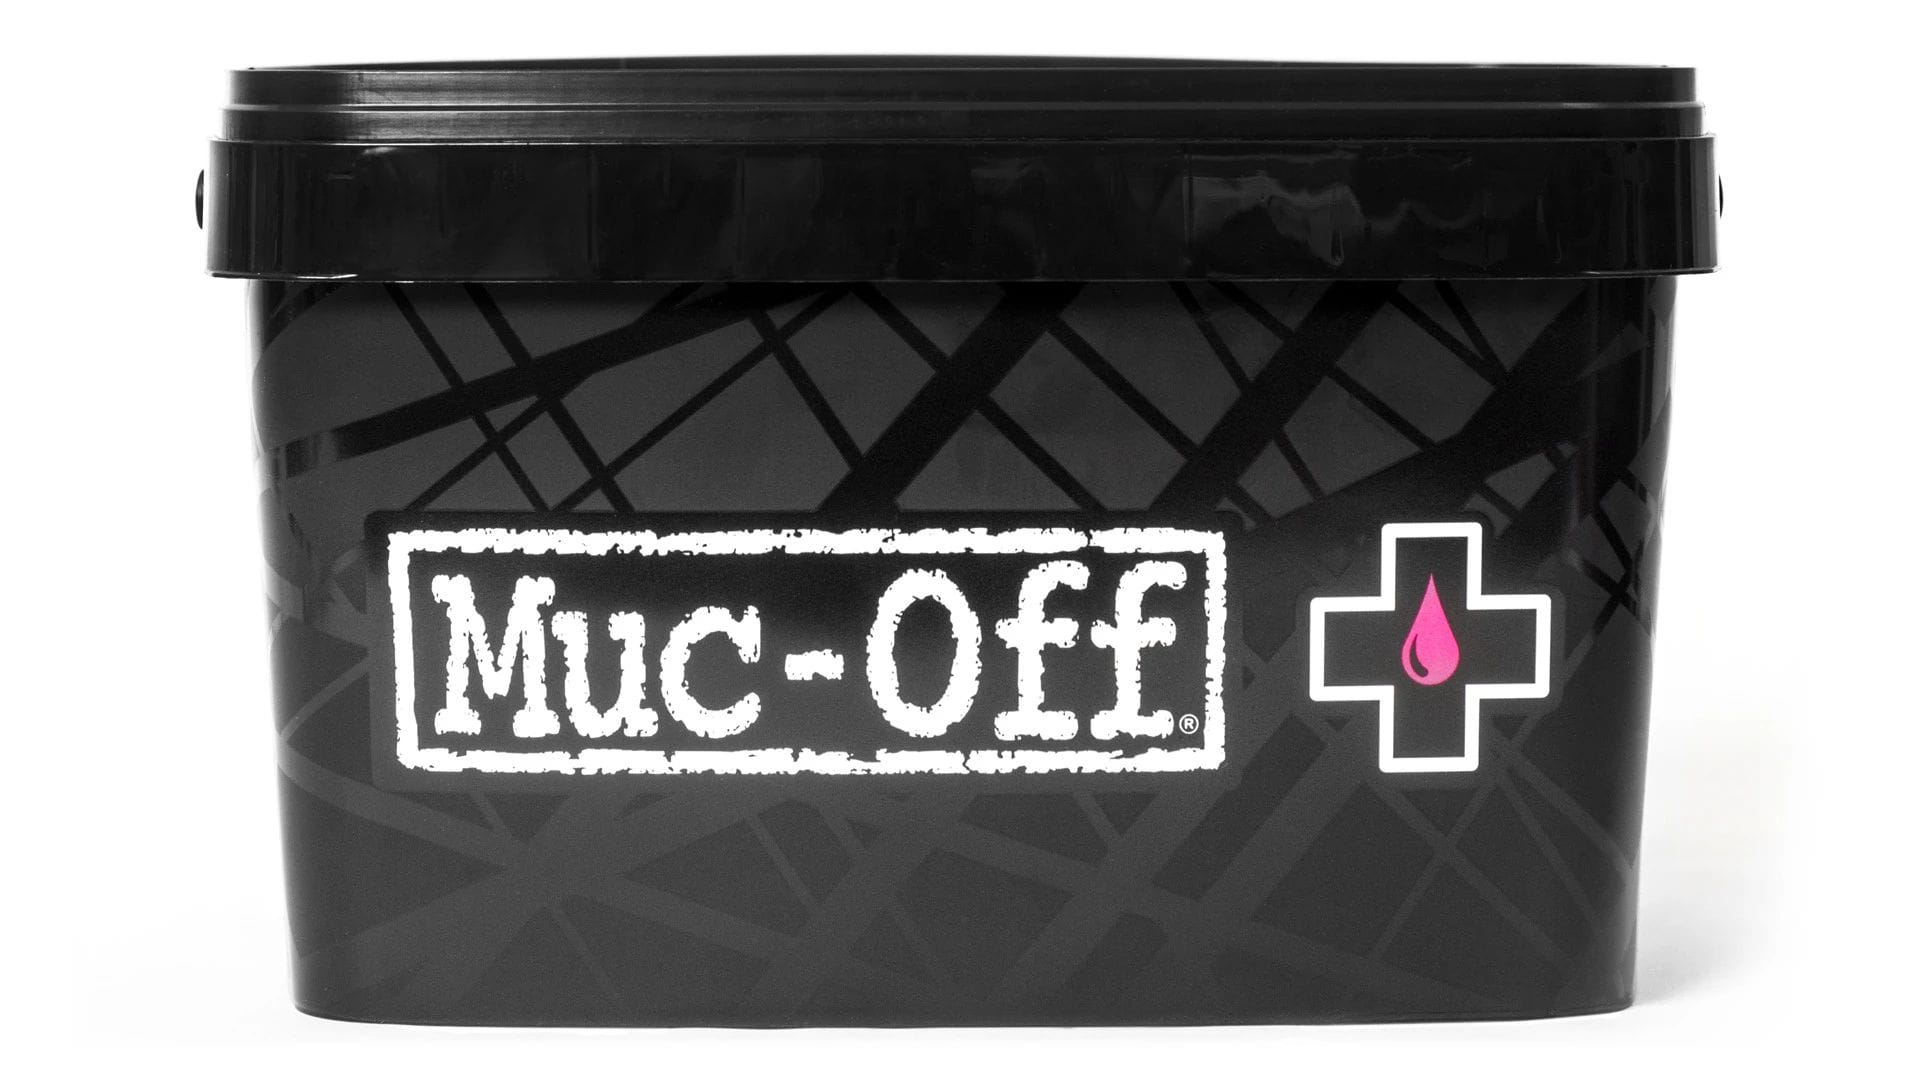 MUC-OFF 8-IN ONE BIKE CLEANING KIT